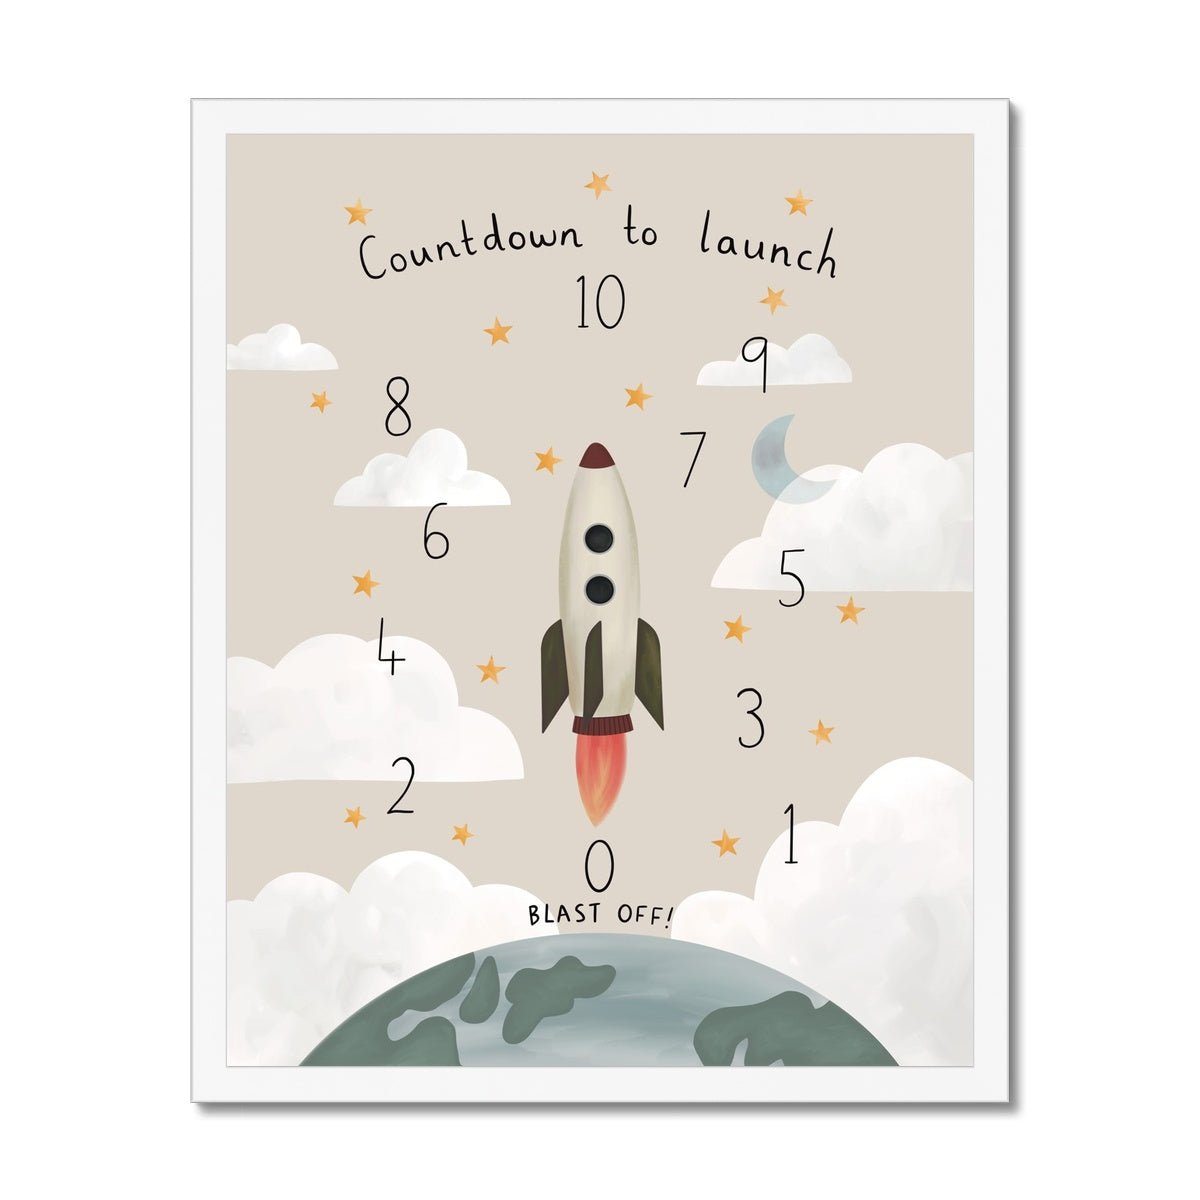 Countdown to launch in stone / Framed Print